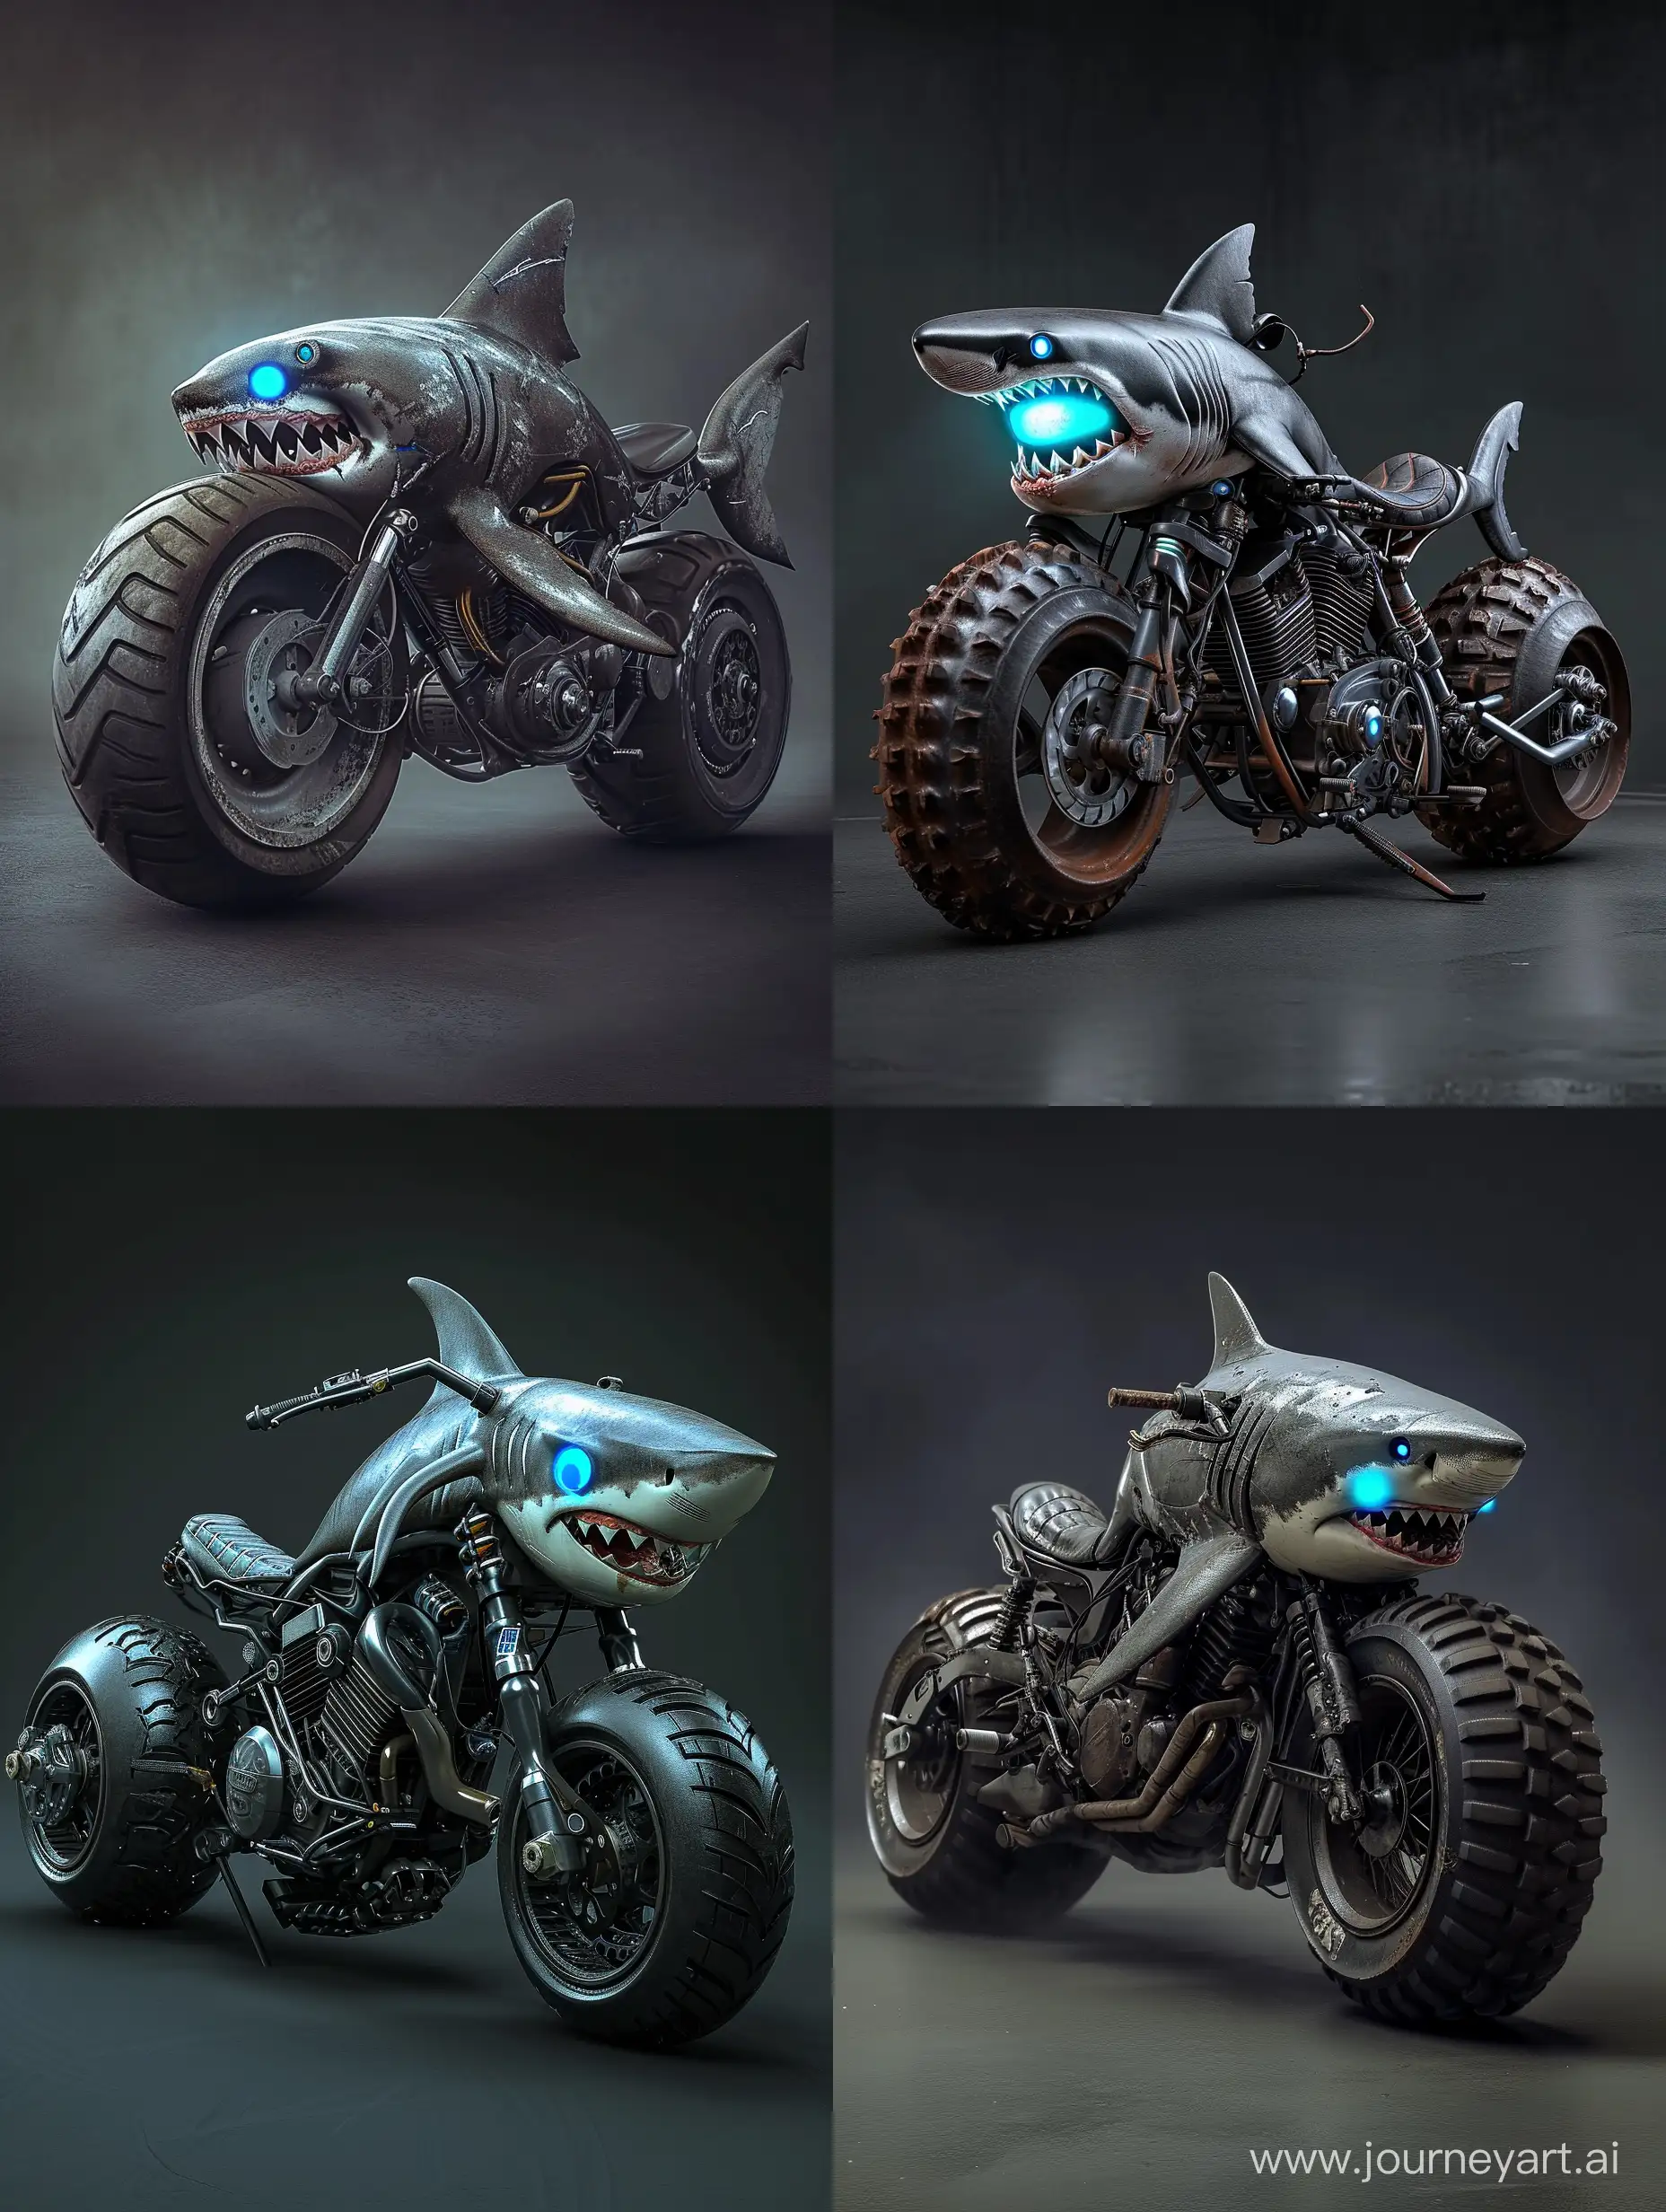 A motorcycle with a shark's head and body, glowing blue eyes, sharp teeth, and large wheels. The background is dark grey.